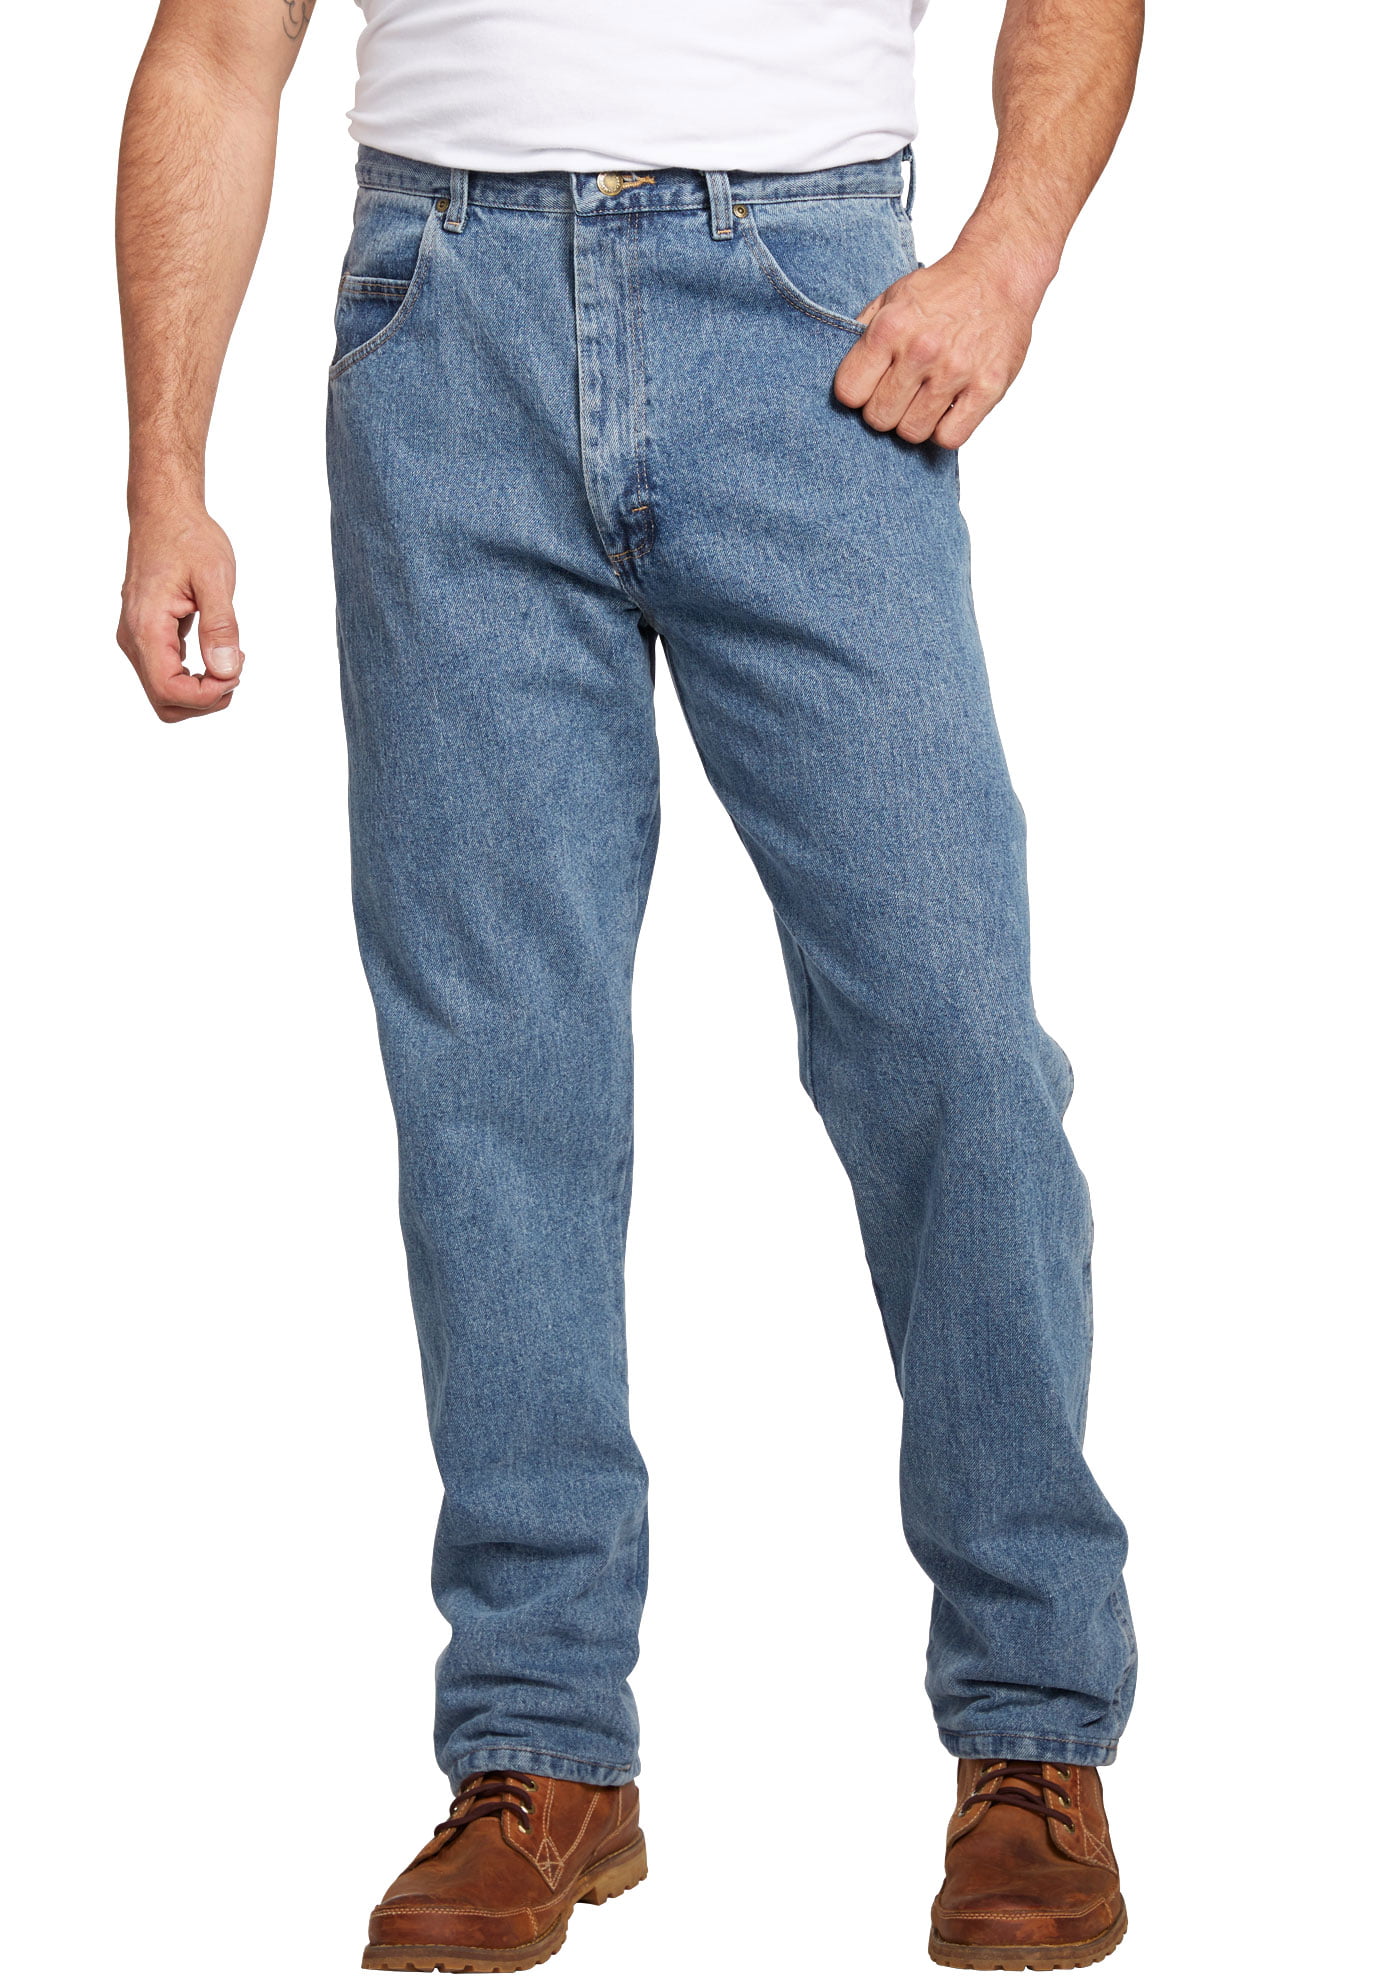 Wrangler - Wrangler Men's Big & Tall Tall Relaxed Fit Classic Jeans ...